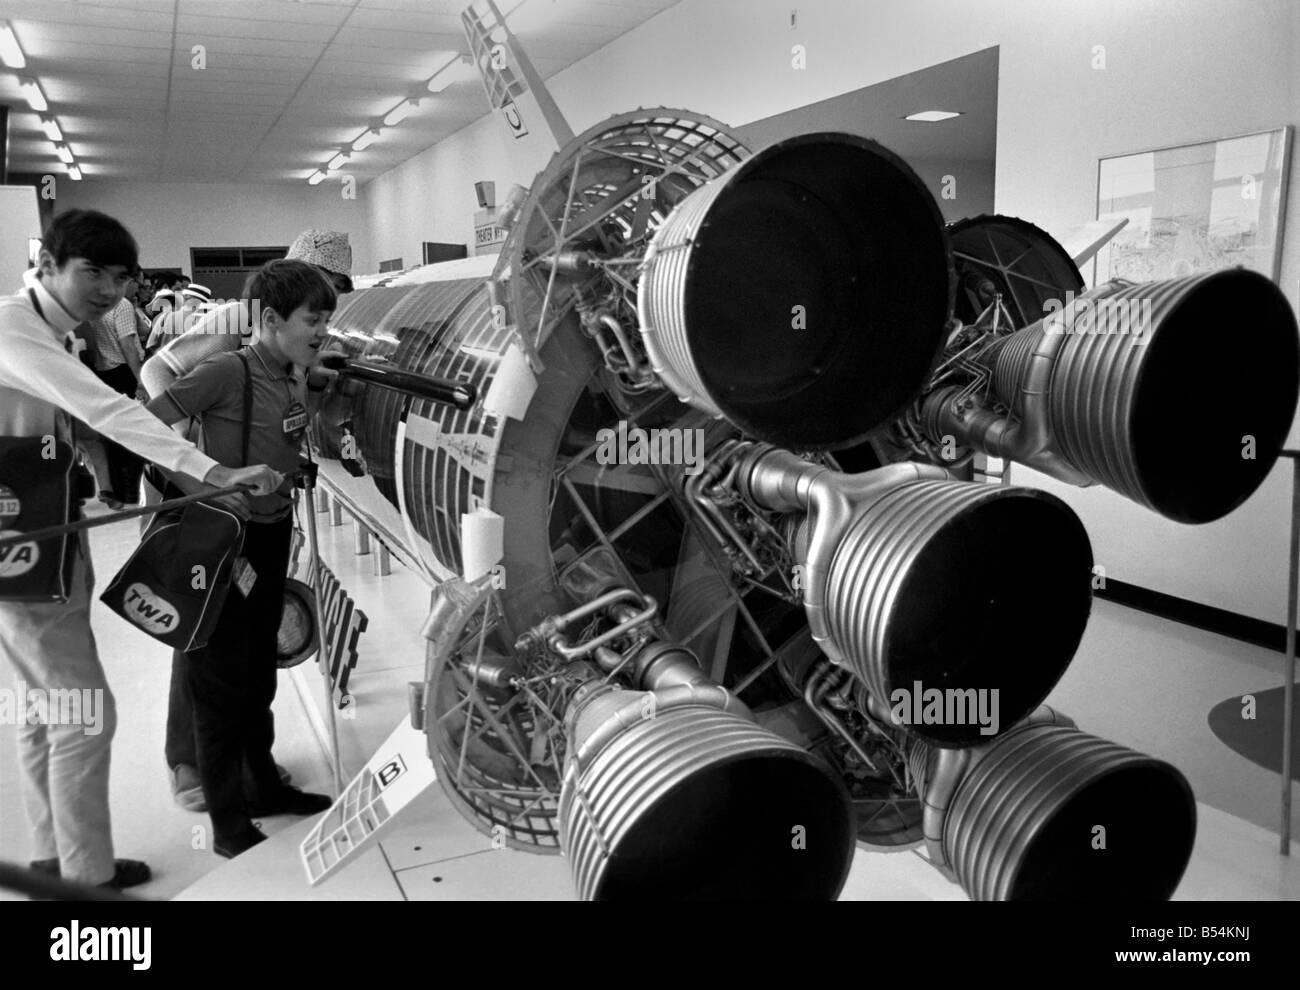 Visitors at NASA Space Station in Florida, U.S.A a few hours before Apollo 12 blasted off on a mission to the moon. Looking at Stock Photo